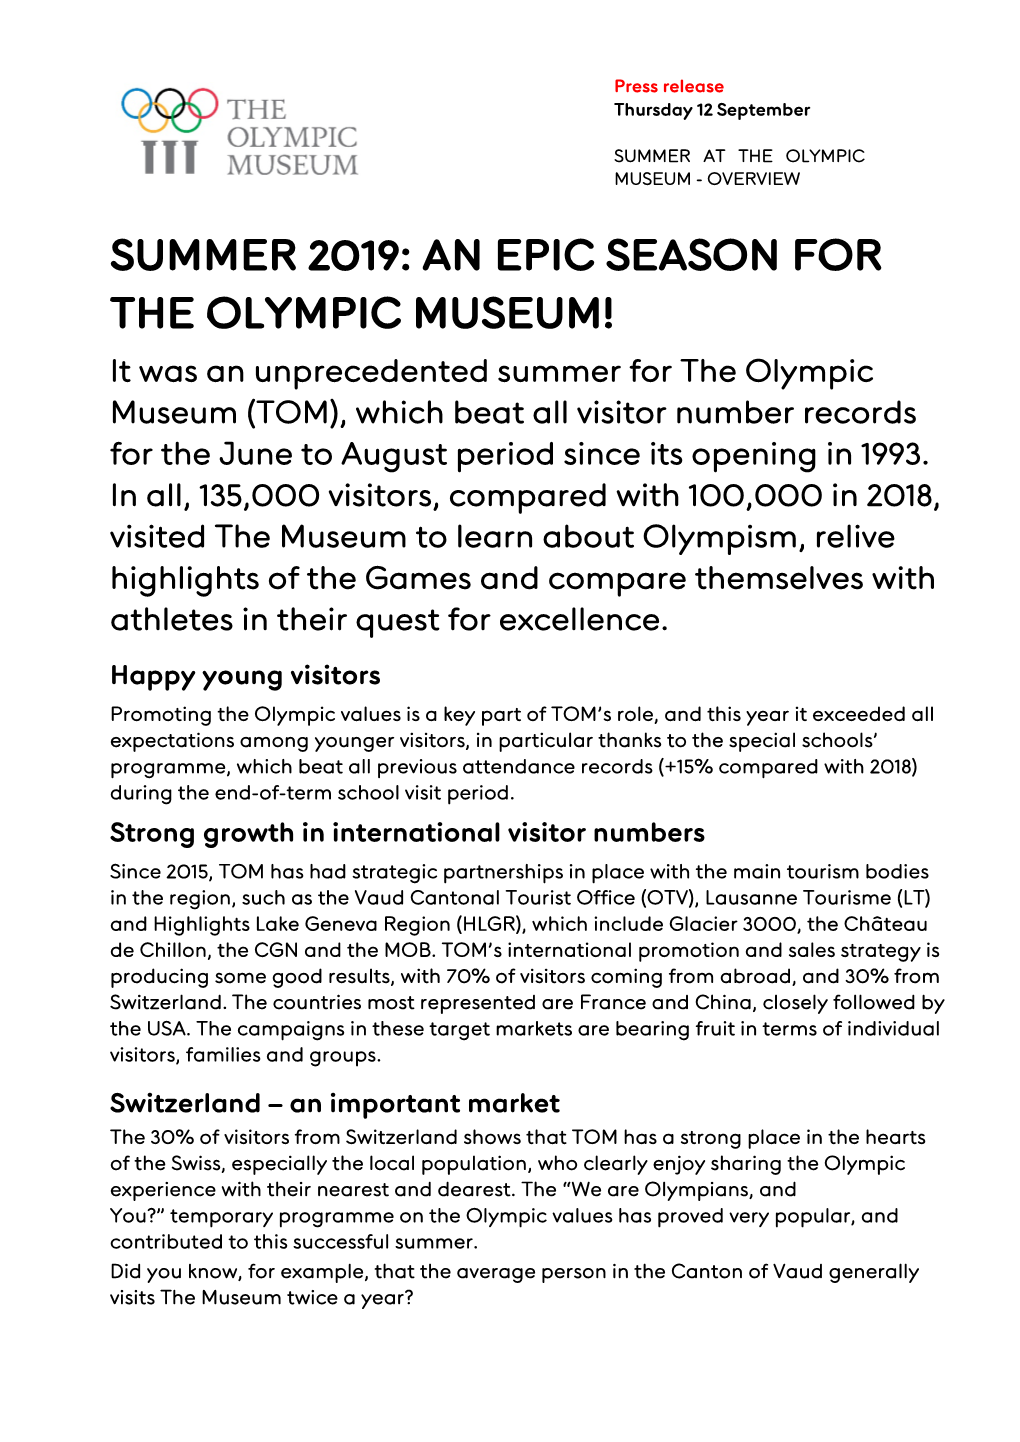 Summer 2019: an Epic Season for the Olympic Museum!